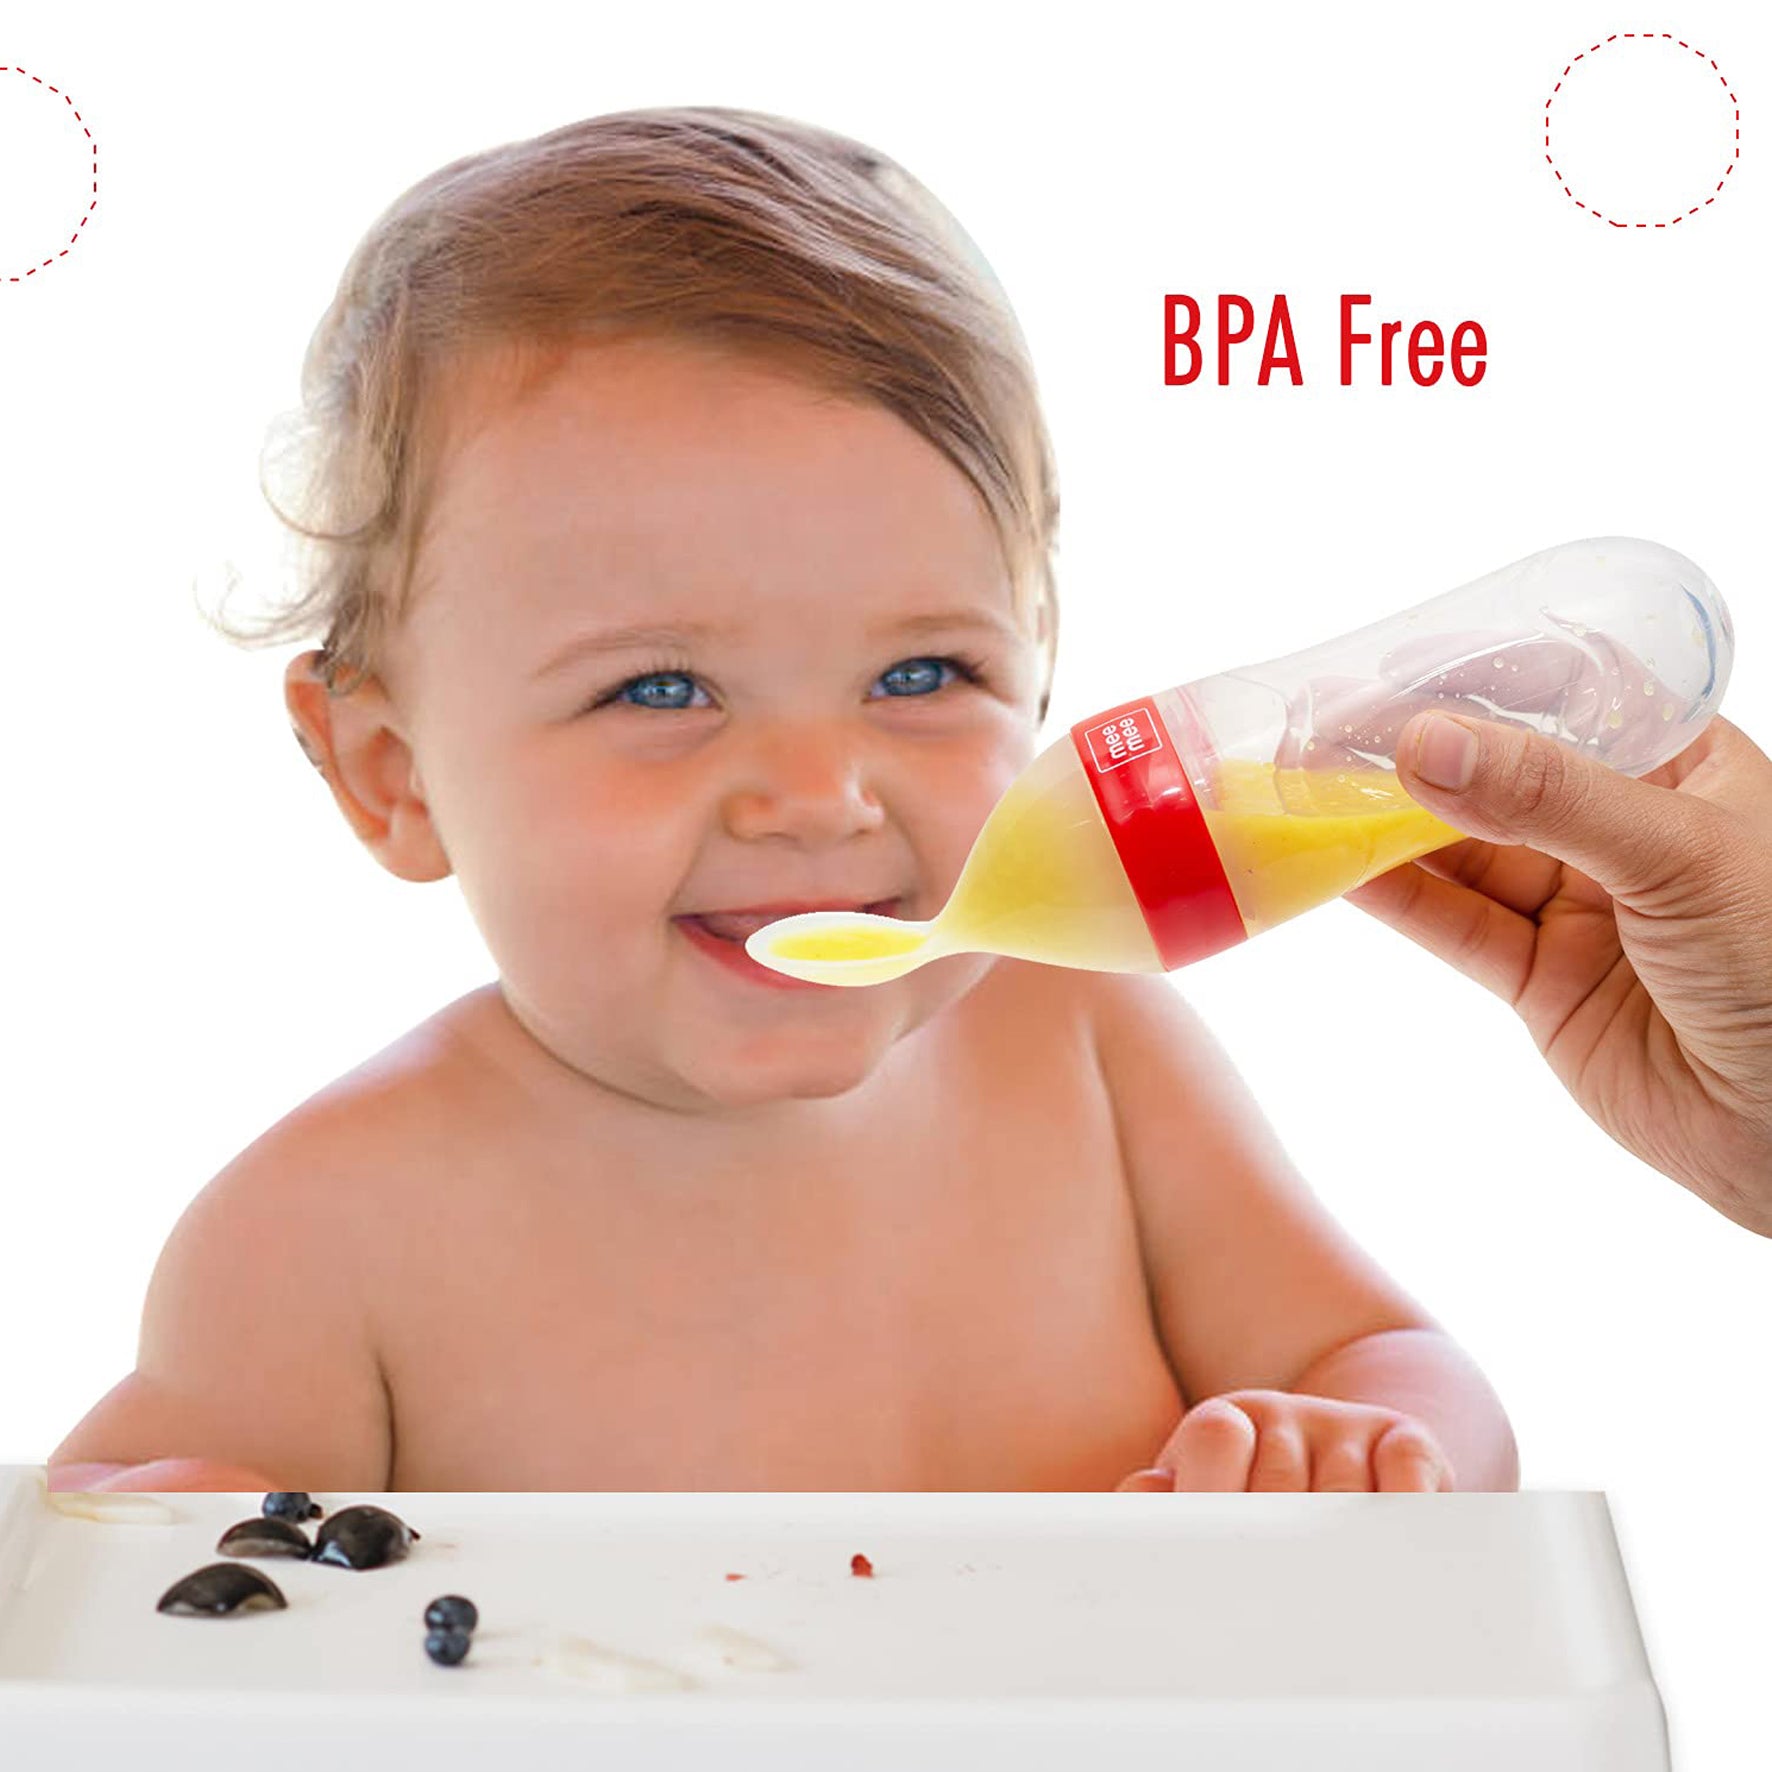 Mee Mee Squeezy Silicone Spoon Food Feeder for Babies of 6 to12 Months with in-Built Stand